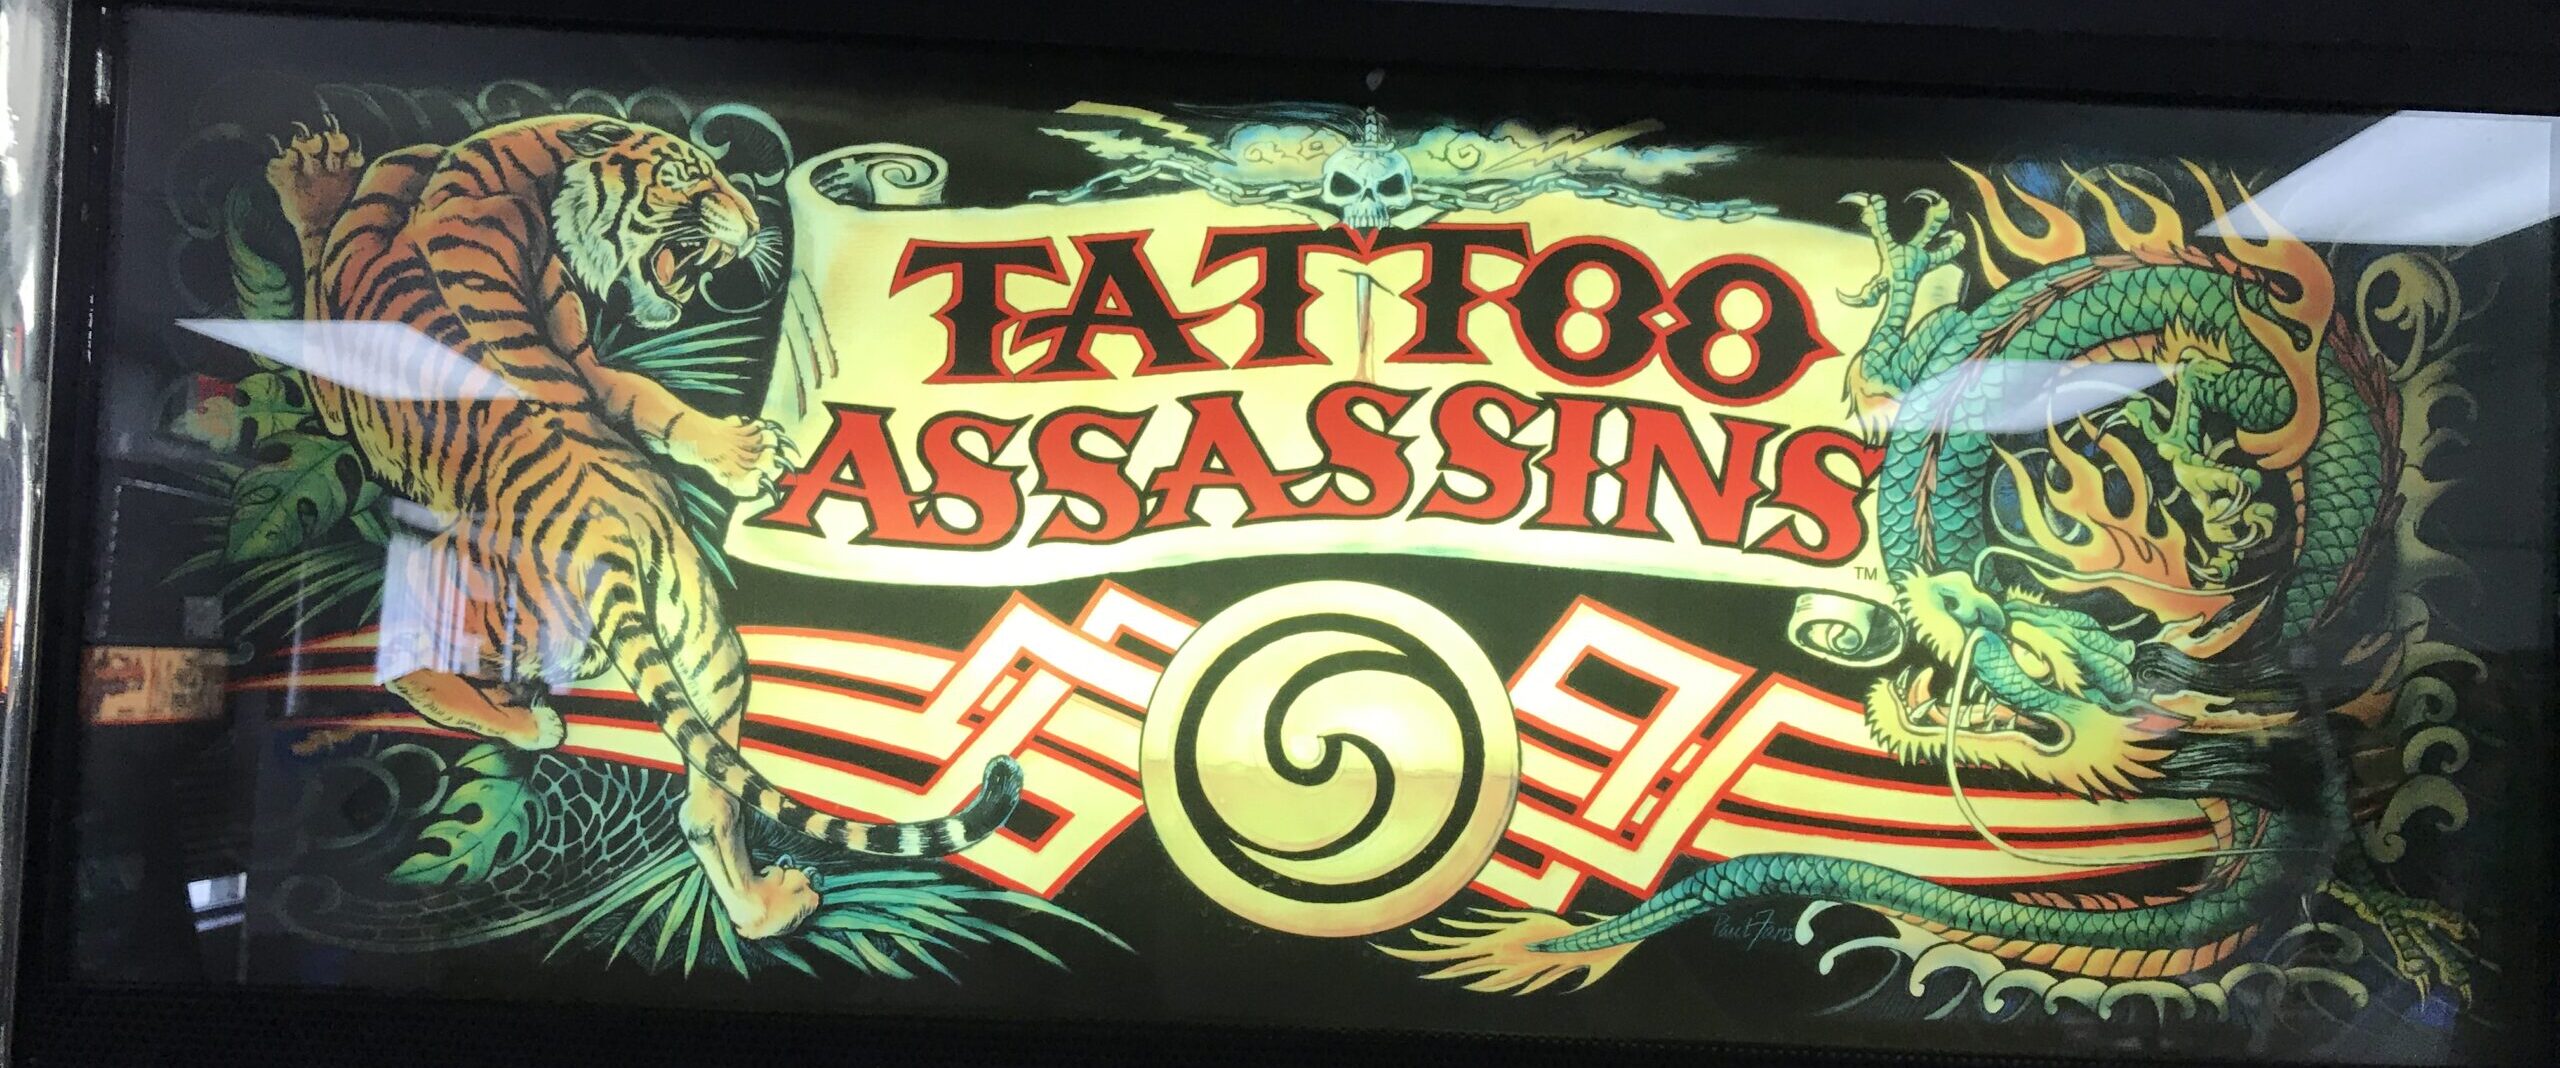 Read more about the article A World of Games: Tattoo Assassins